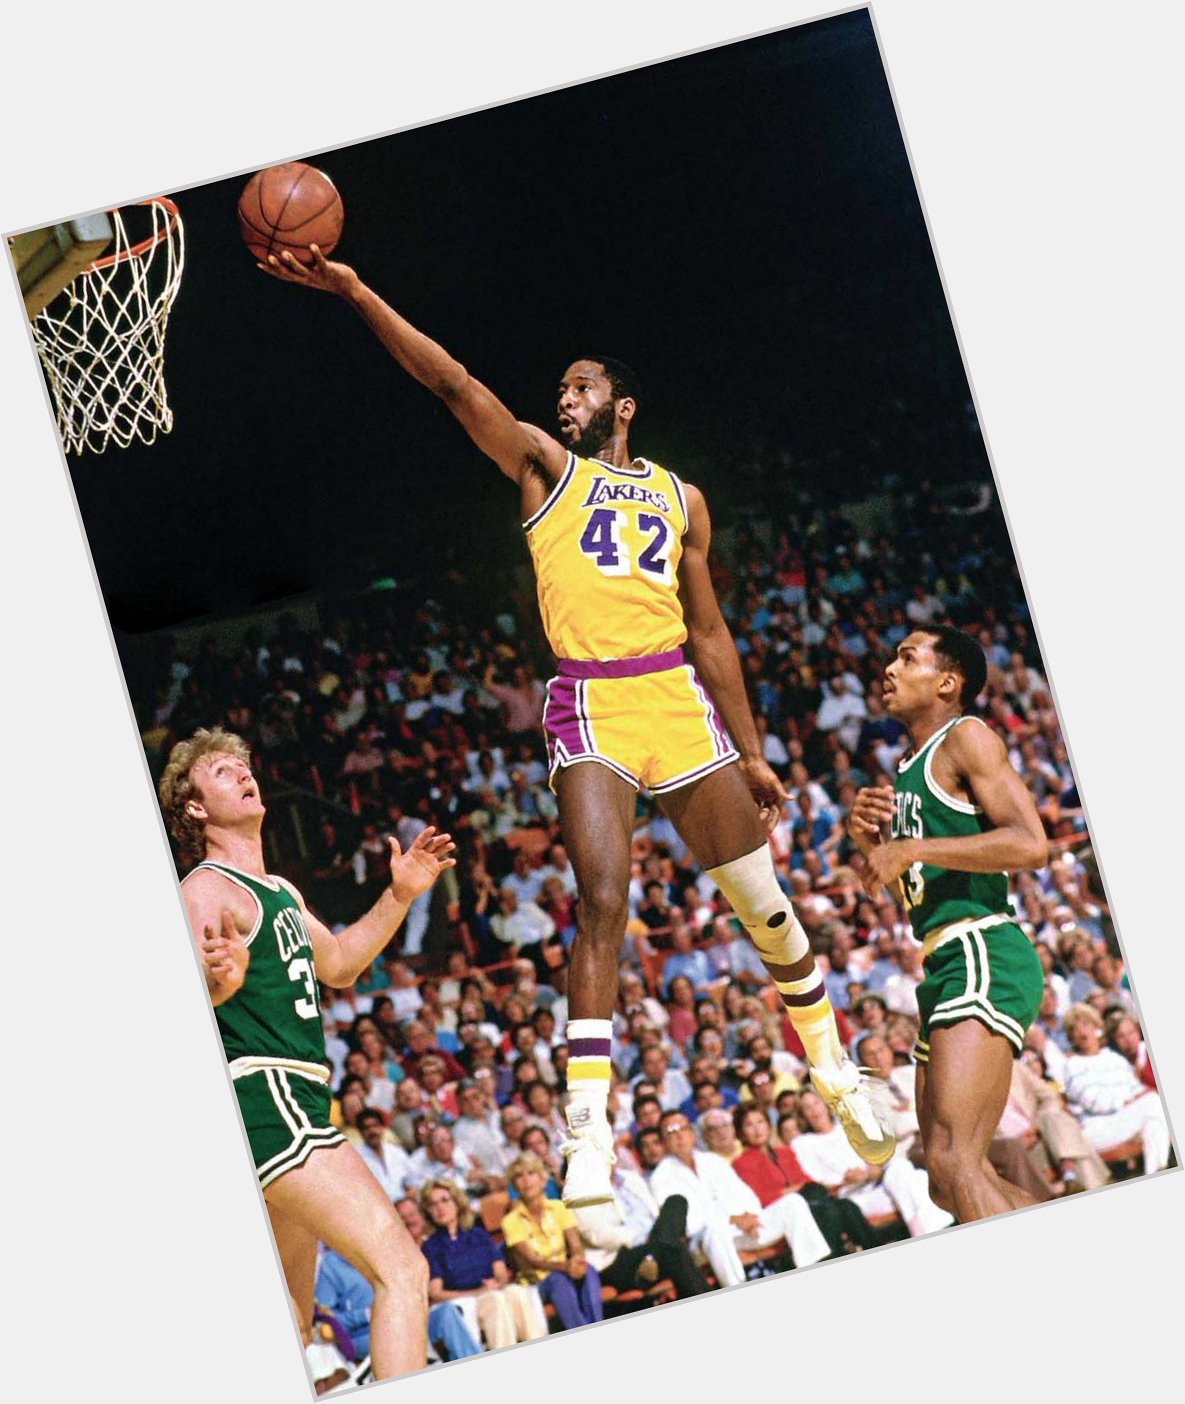 Happy birthday to NBA legend and former MVP James Worthy! 